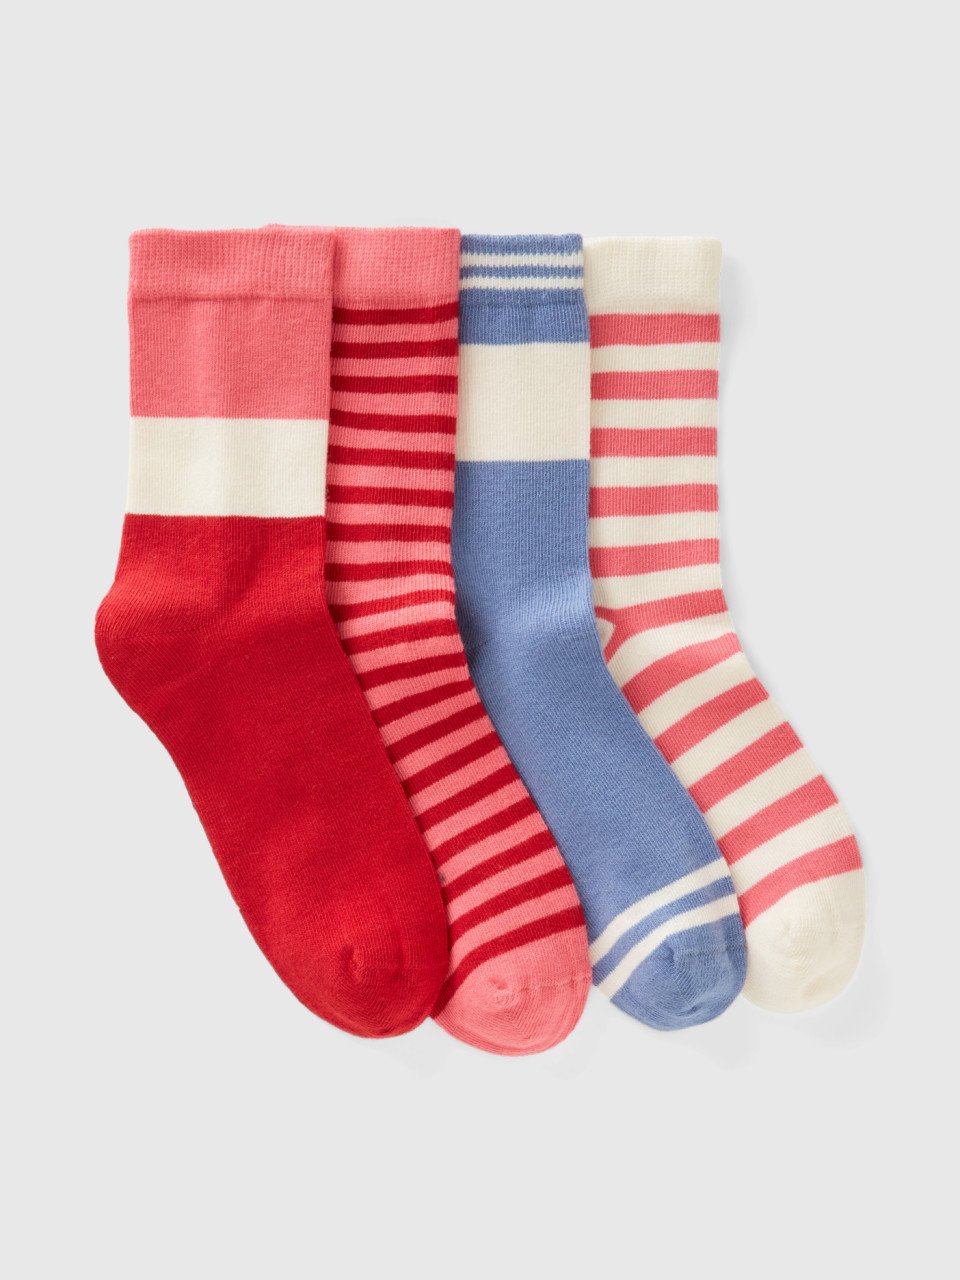 Benetton, Four Pairs Of Striped Socks, Multi-color, Kids